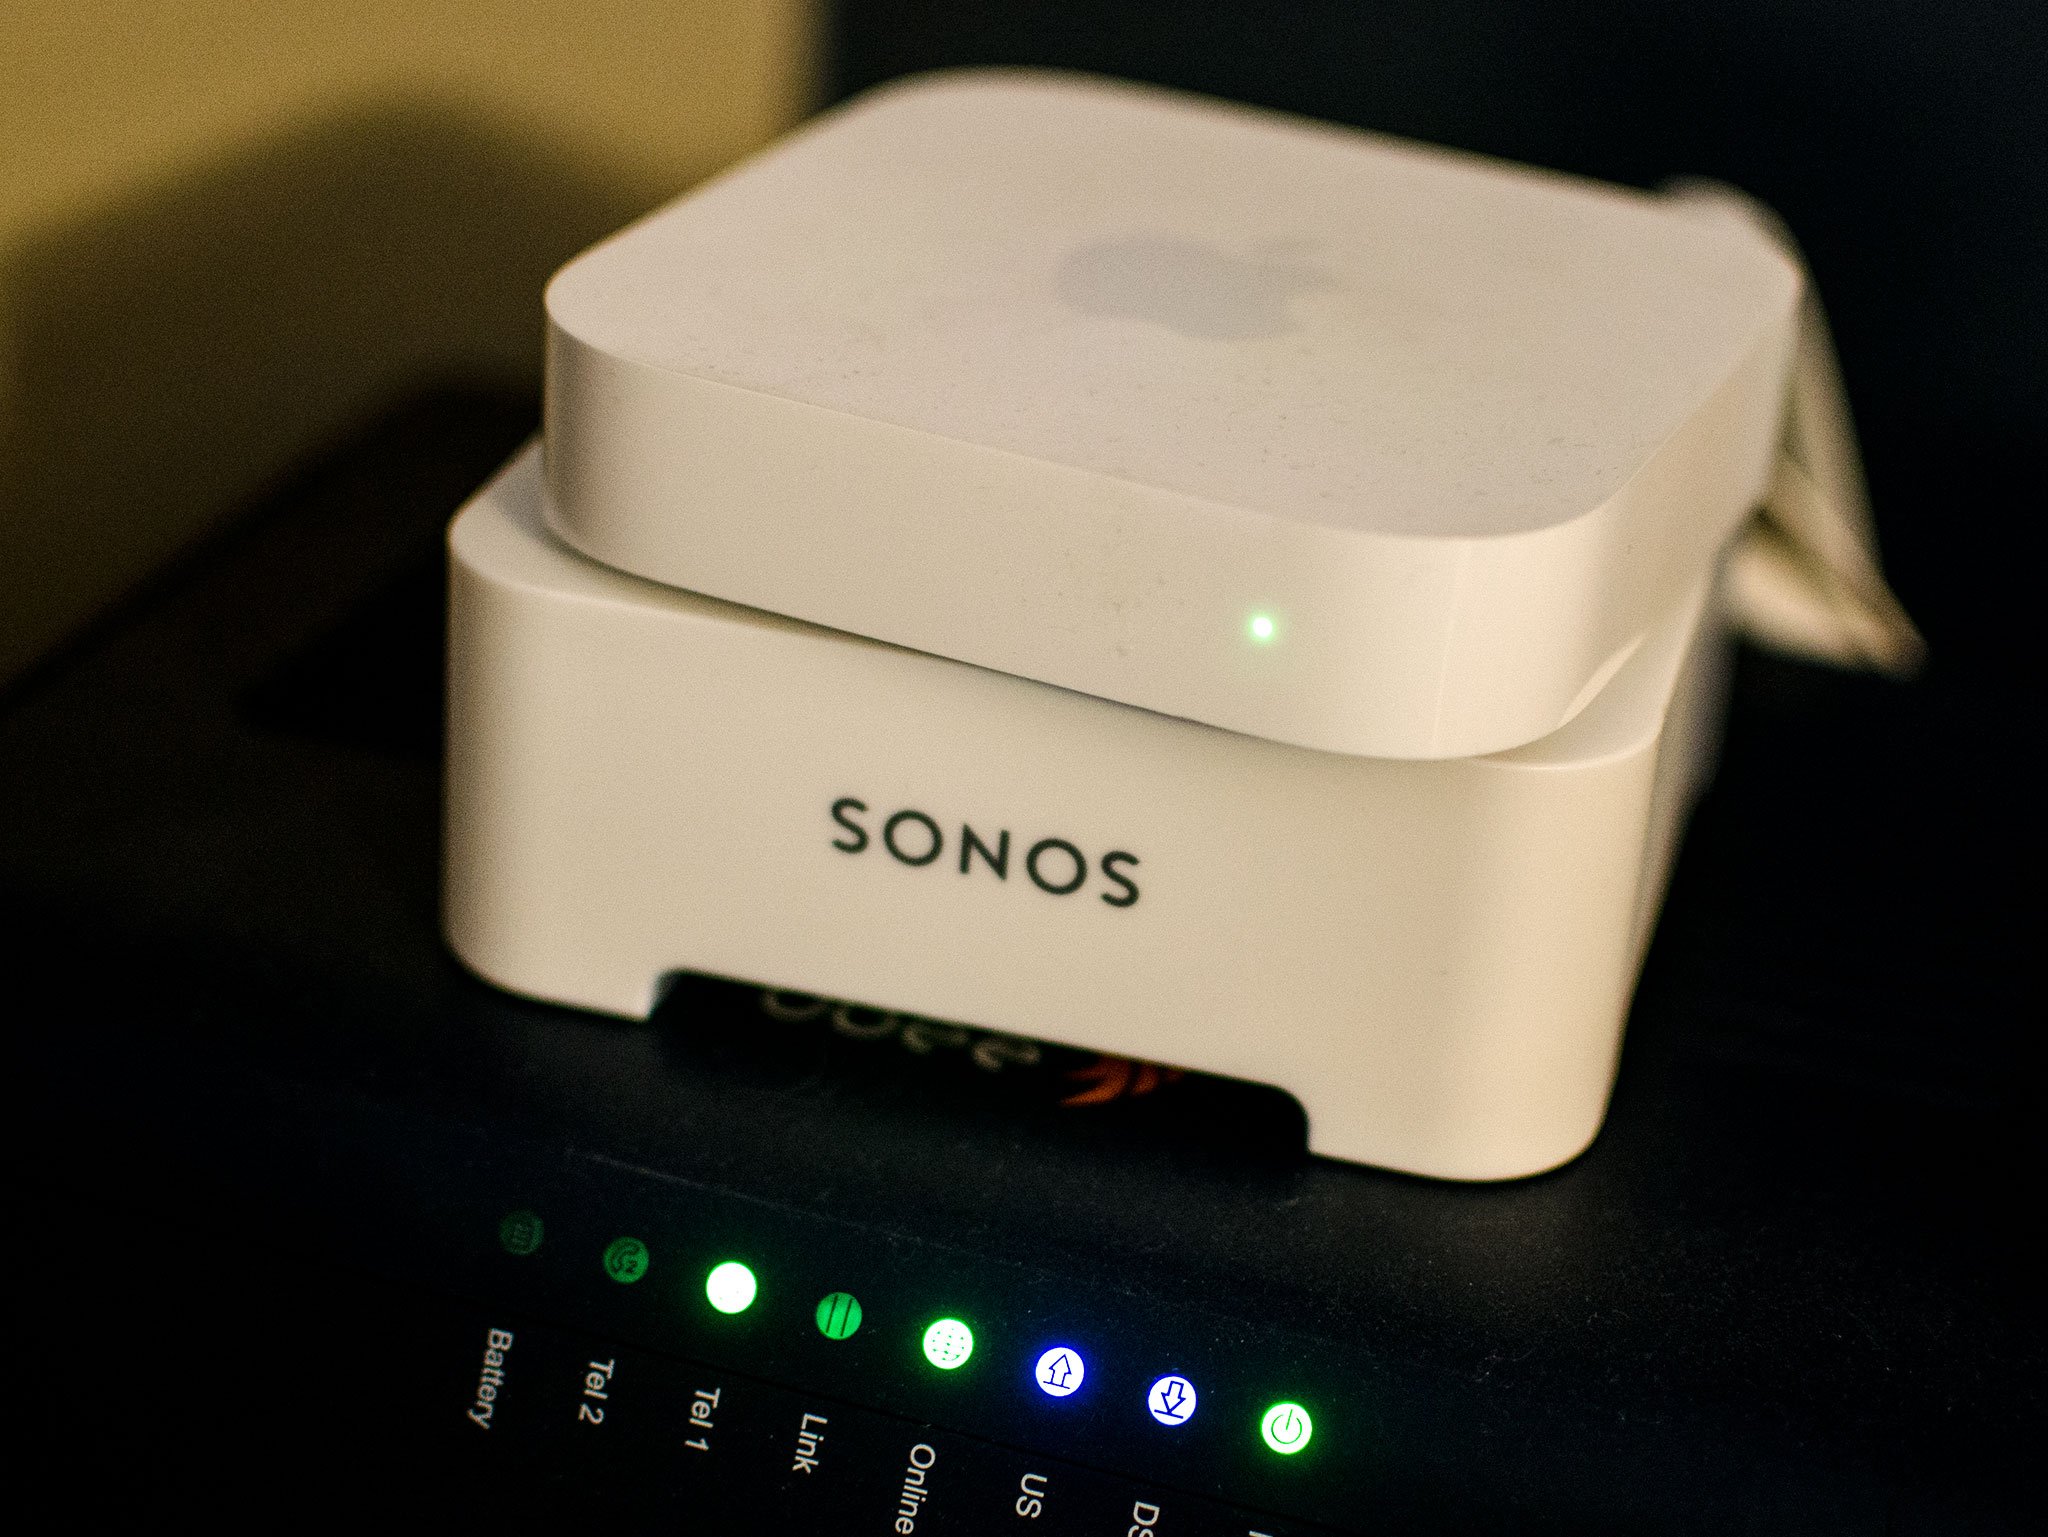 Getting slow speeds or dropped connections on your Apple AirPort WiFi router? Here's how to fix